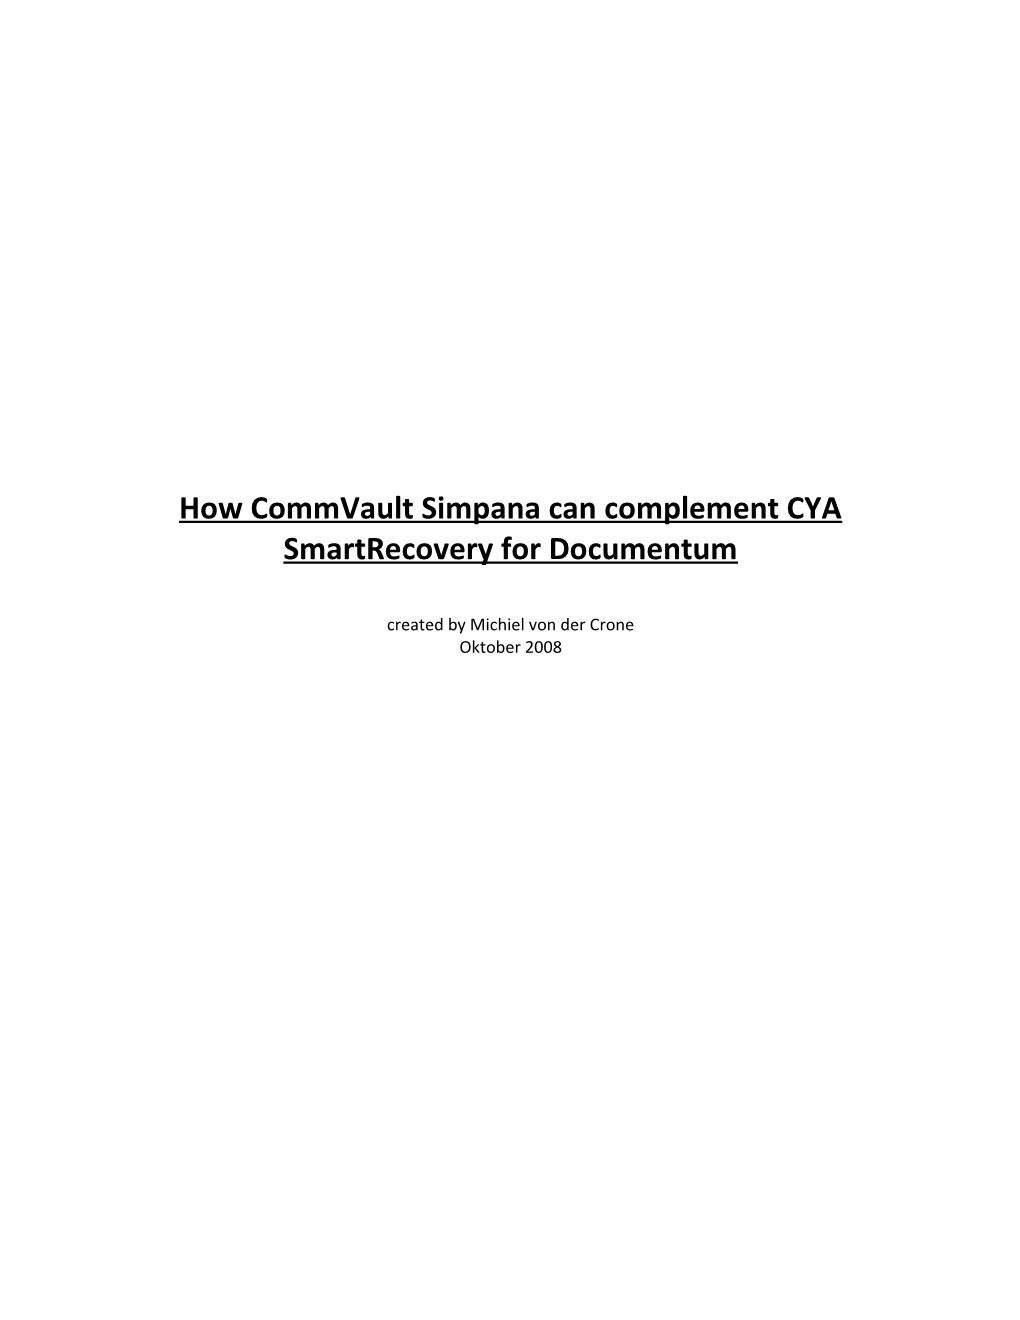 How Commvault Simpana Can Complement CYA Smartrecovery for Documentum